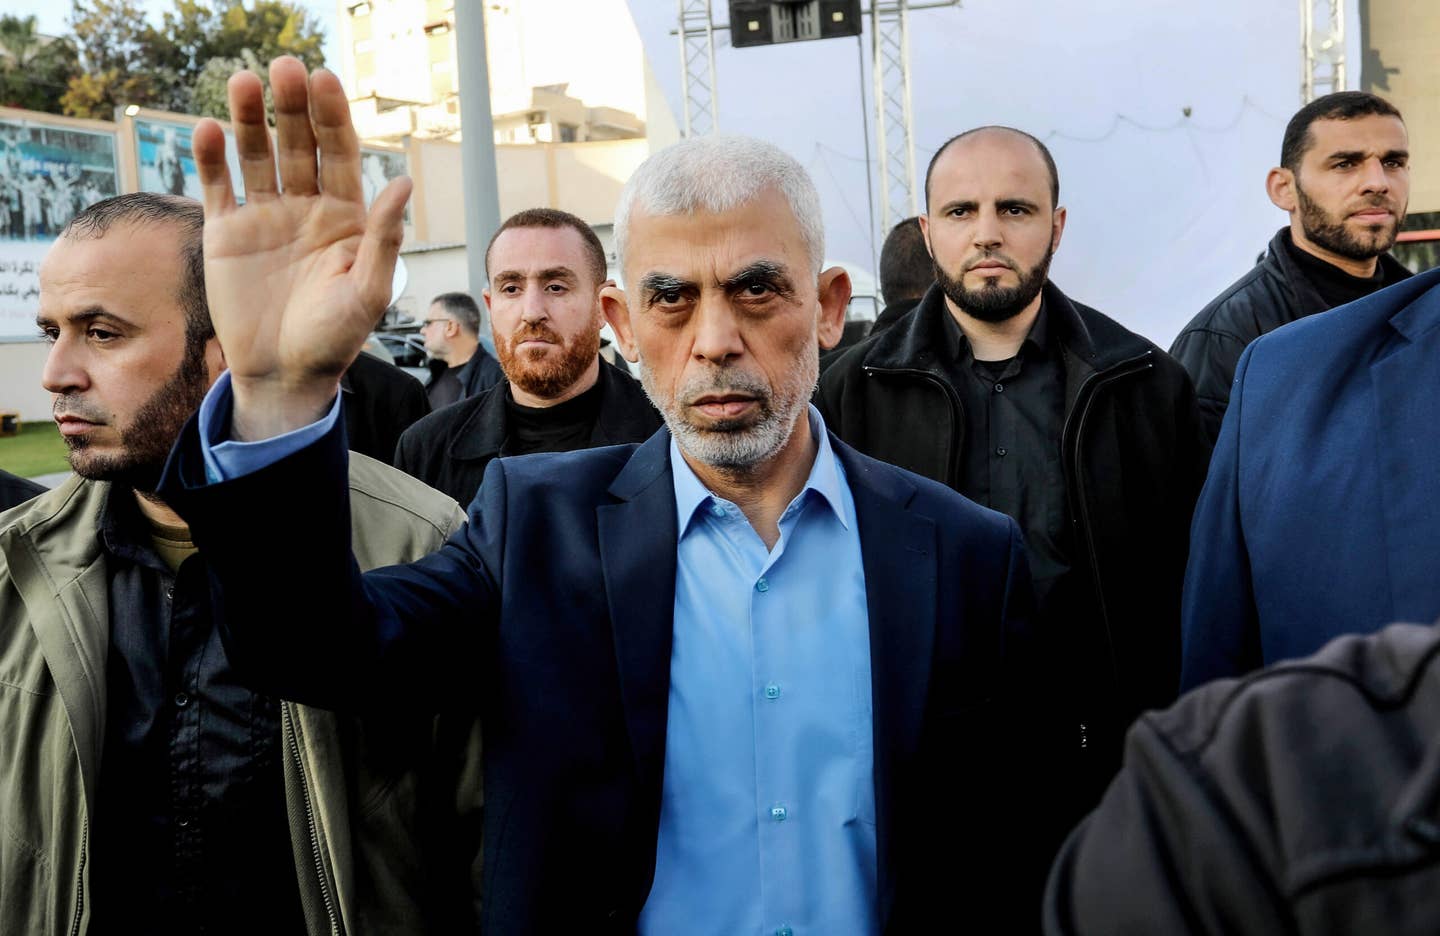 Yahya Sinwar, head of the Palestinian Islamic movement Hamas in the Gaza Strip, visited hostages taken by his organization shortly after they were captured, according to Israel's<em> I24</em> news outlet. (Photo by Yousef Masoud/SOPA Images/LightRocket via Getty Images)